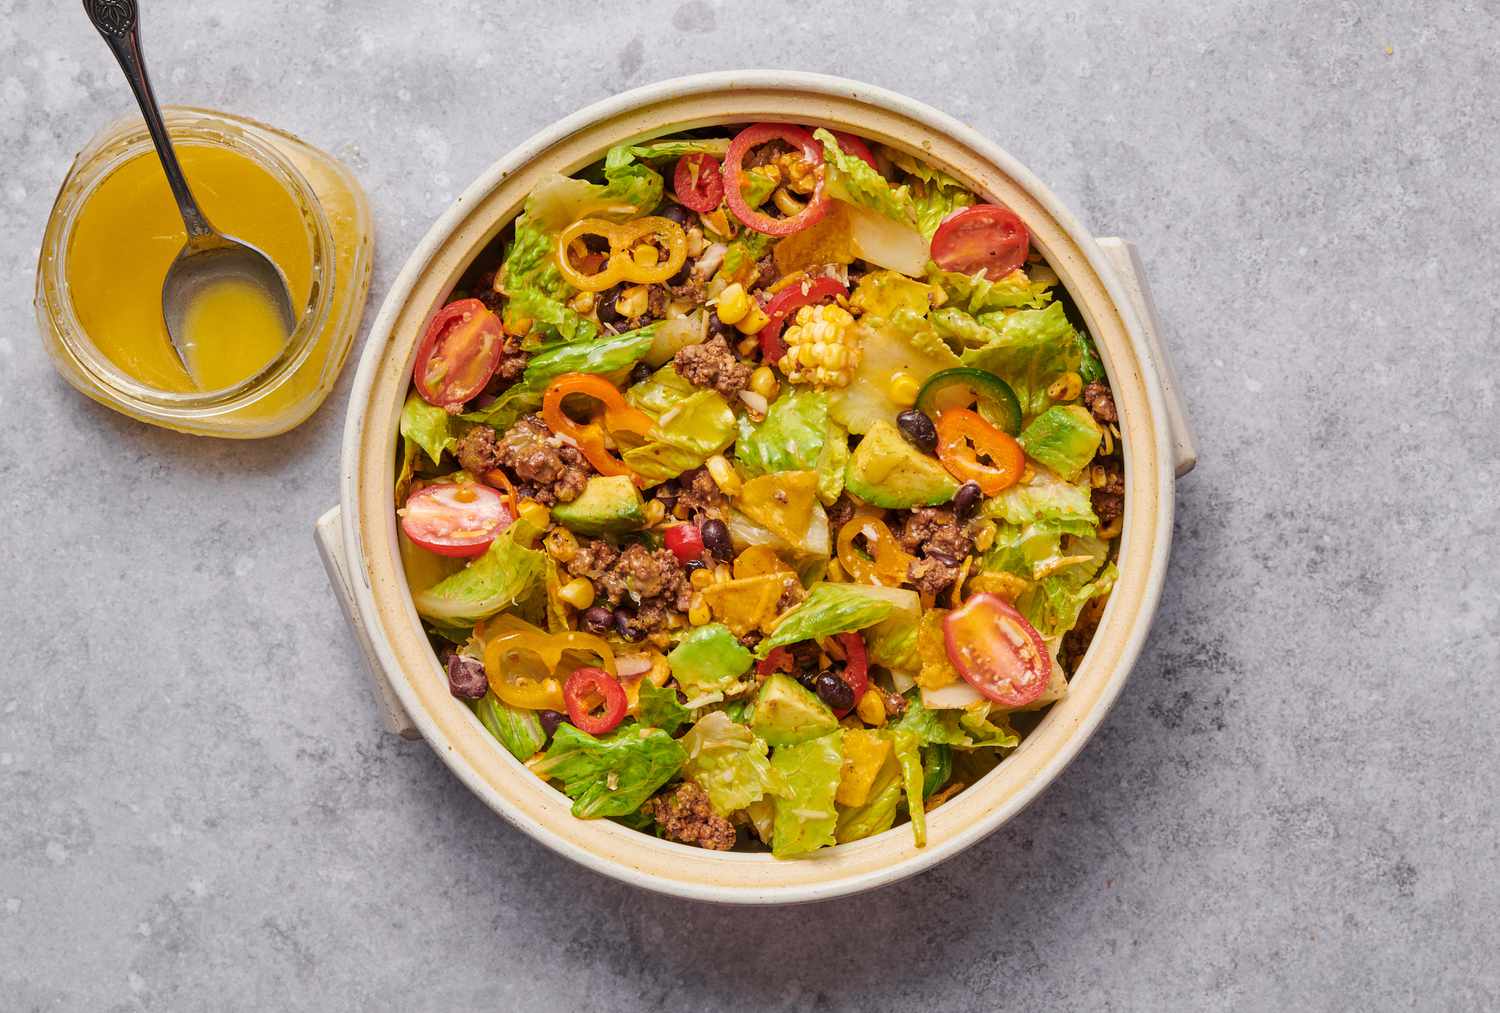 A large bowl of taco salad drizzled with dressing